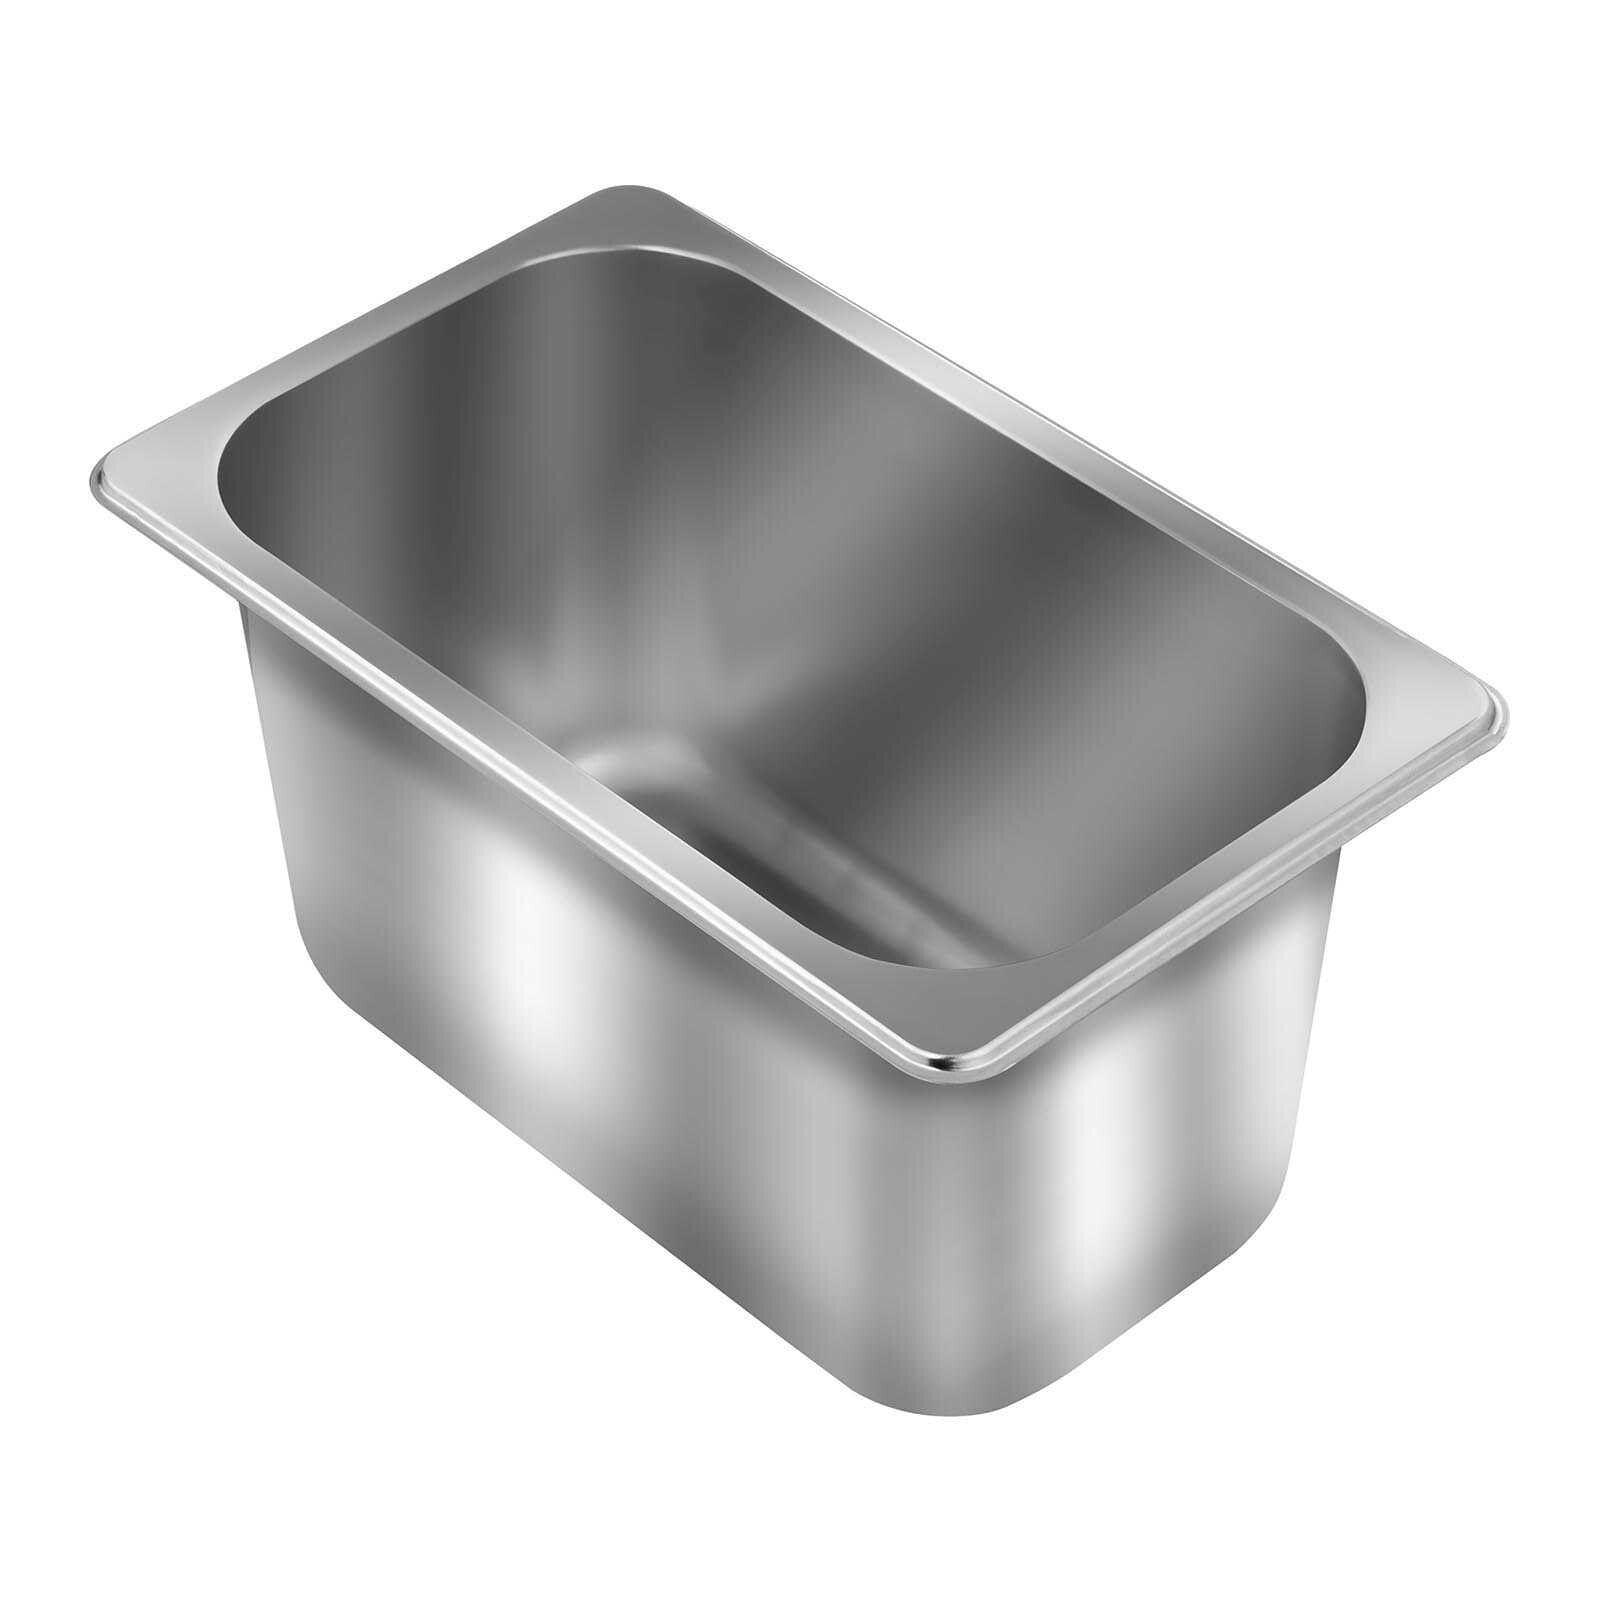 Stainless steel GN1 / 4 gastronomy container, height 15cm 3.6L